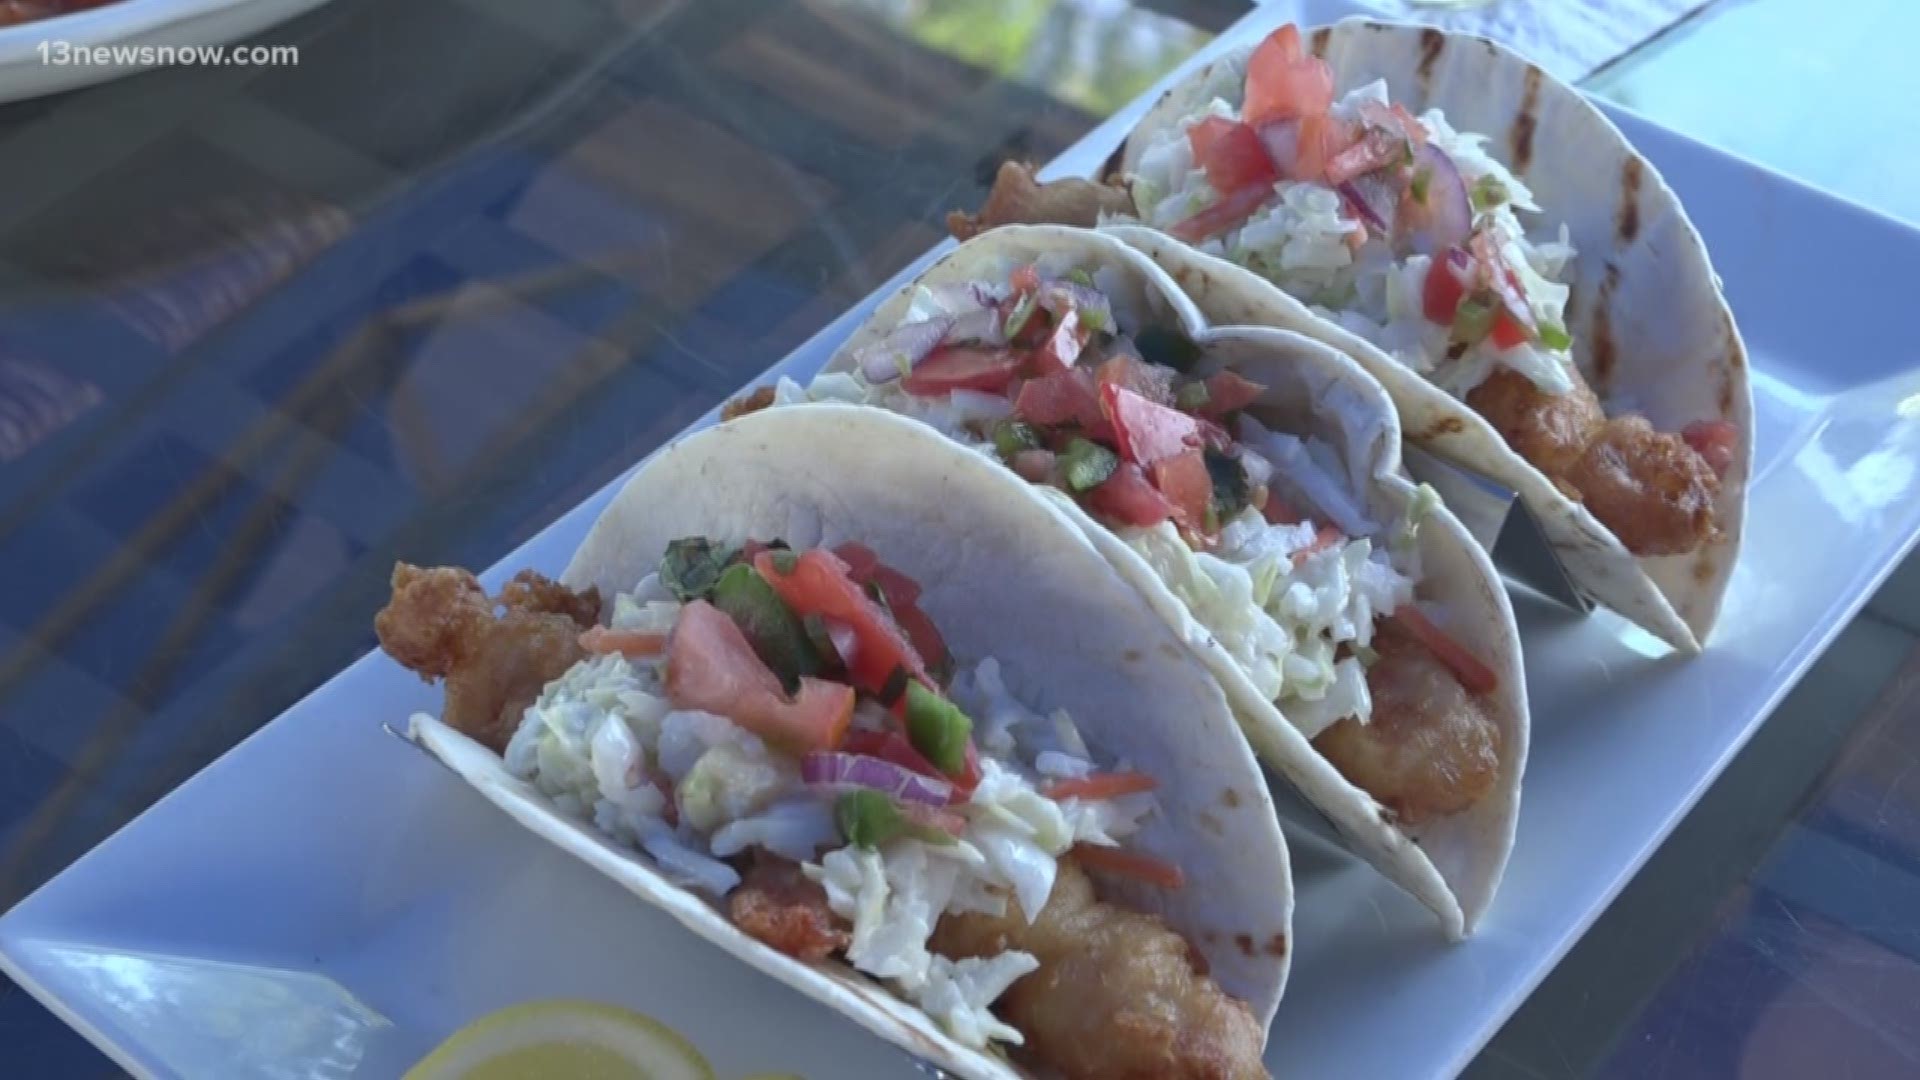 The waterfront restaurant specializes in seafood — including their popular shrimp tempura tacos.